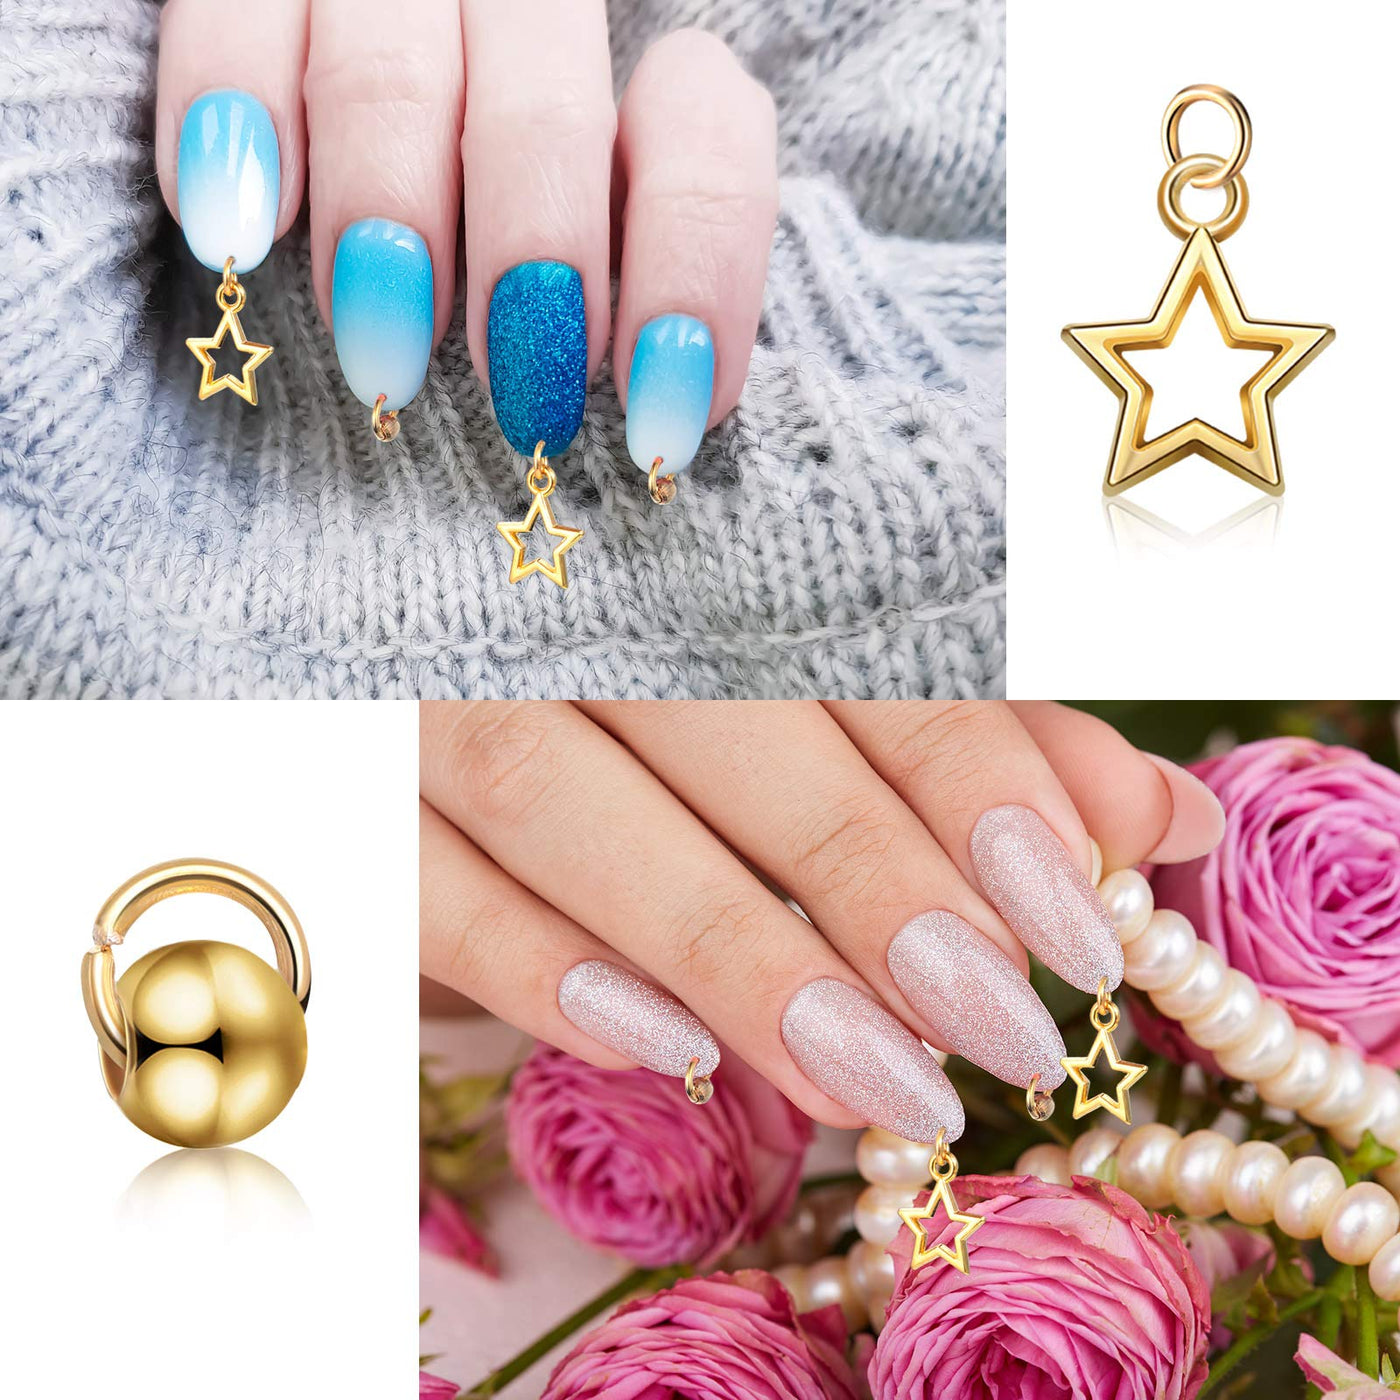 2101 Pieces Dangle Nail Art Charms, Include 1000 Pcs Nail Jewelry Rings,  1000 Pcs Beaded and 100 Pcs Star Accessories with Nail Piercing Tool Hand  Drill for Nails Tip Acrylic Gel Decoration (